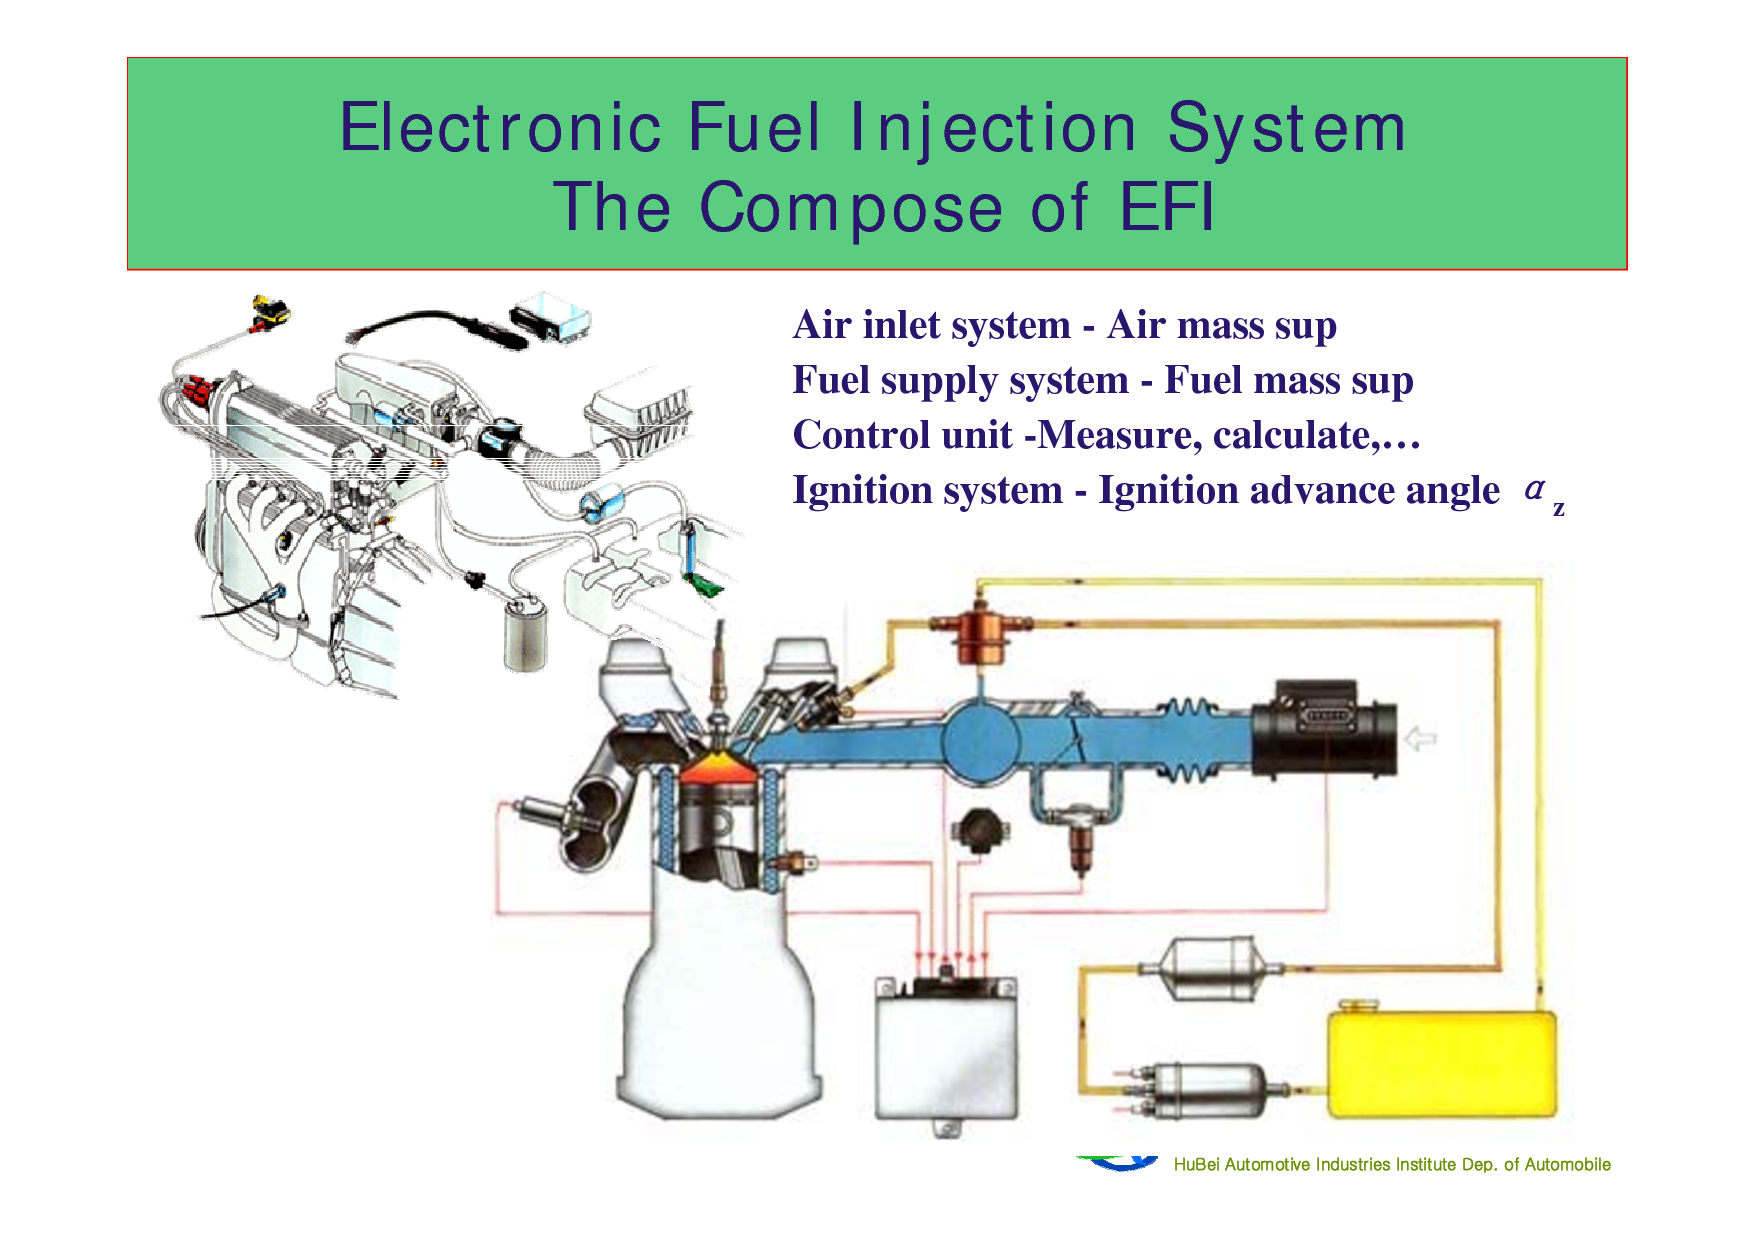 Electronic Fuel Injection